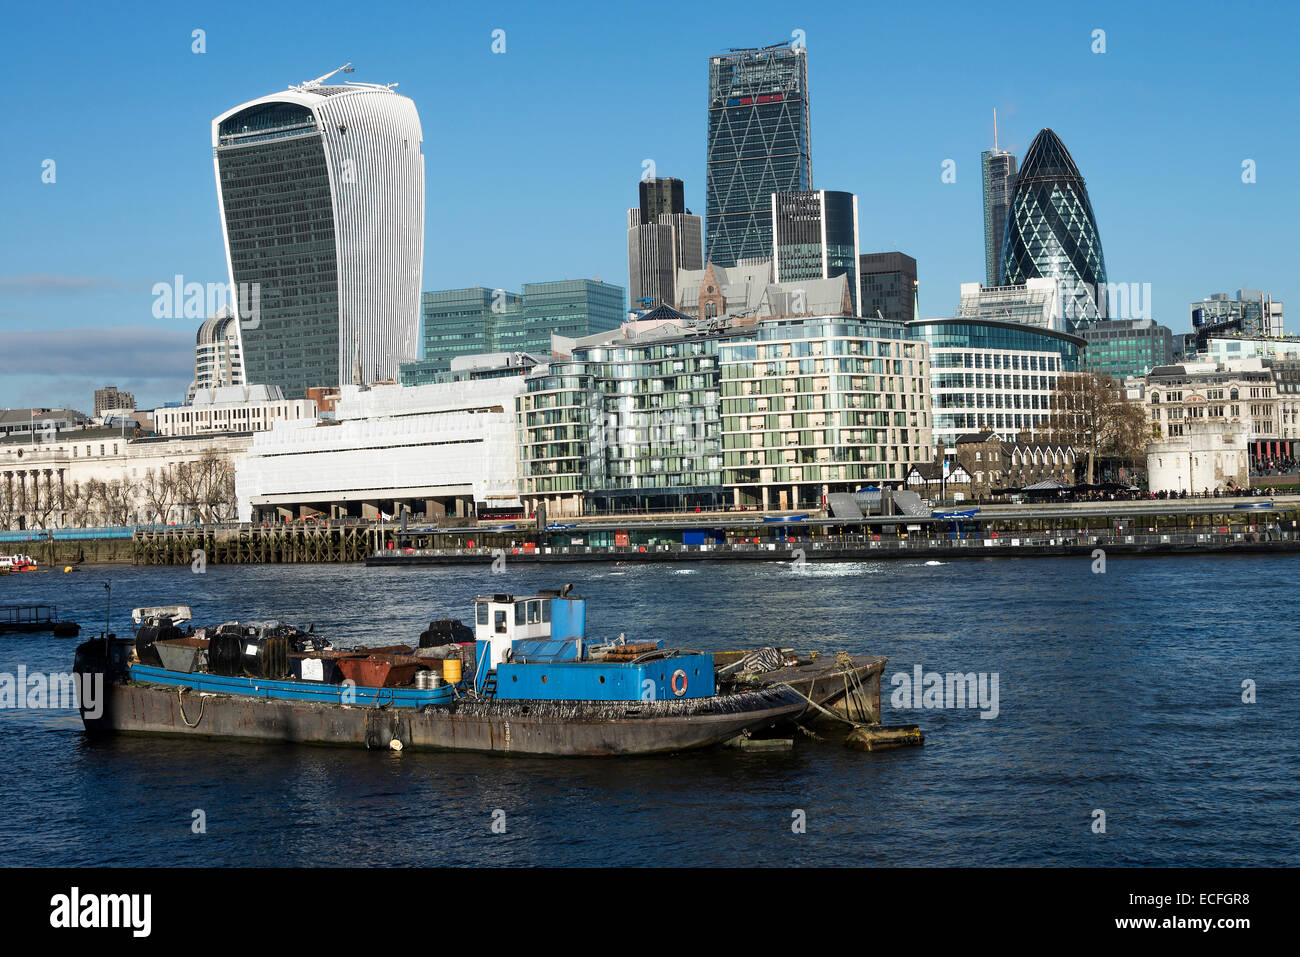 Modern Skyscrapers Make Up Part of the City of London Financial District by the River Thames England United Kingdom UK Stock Photo